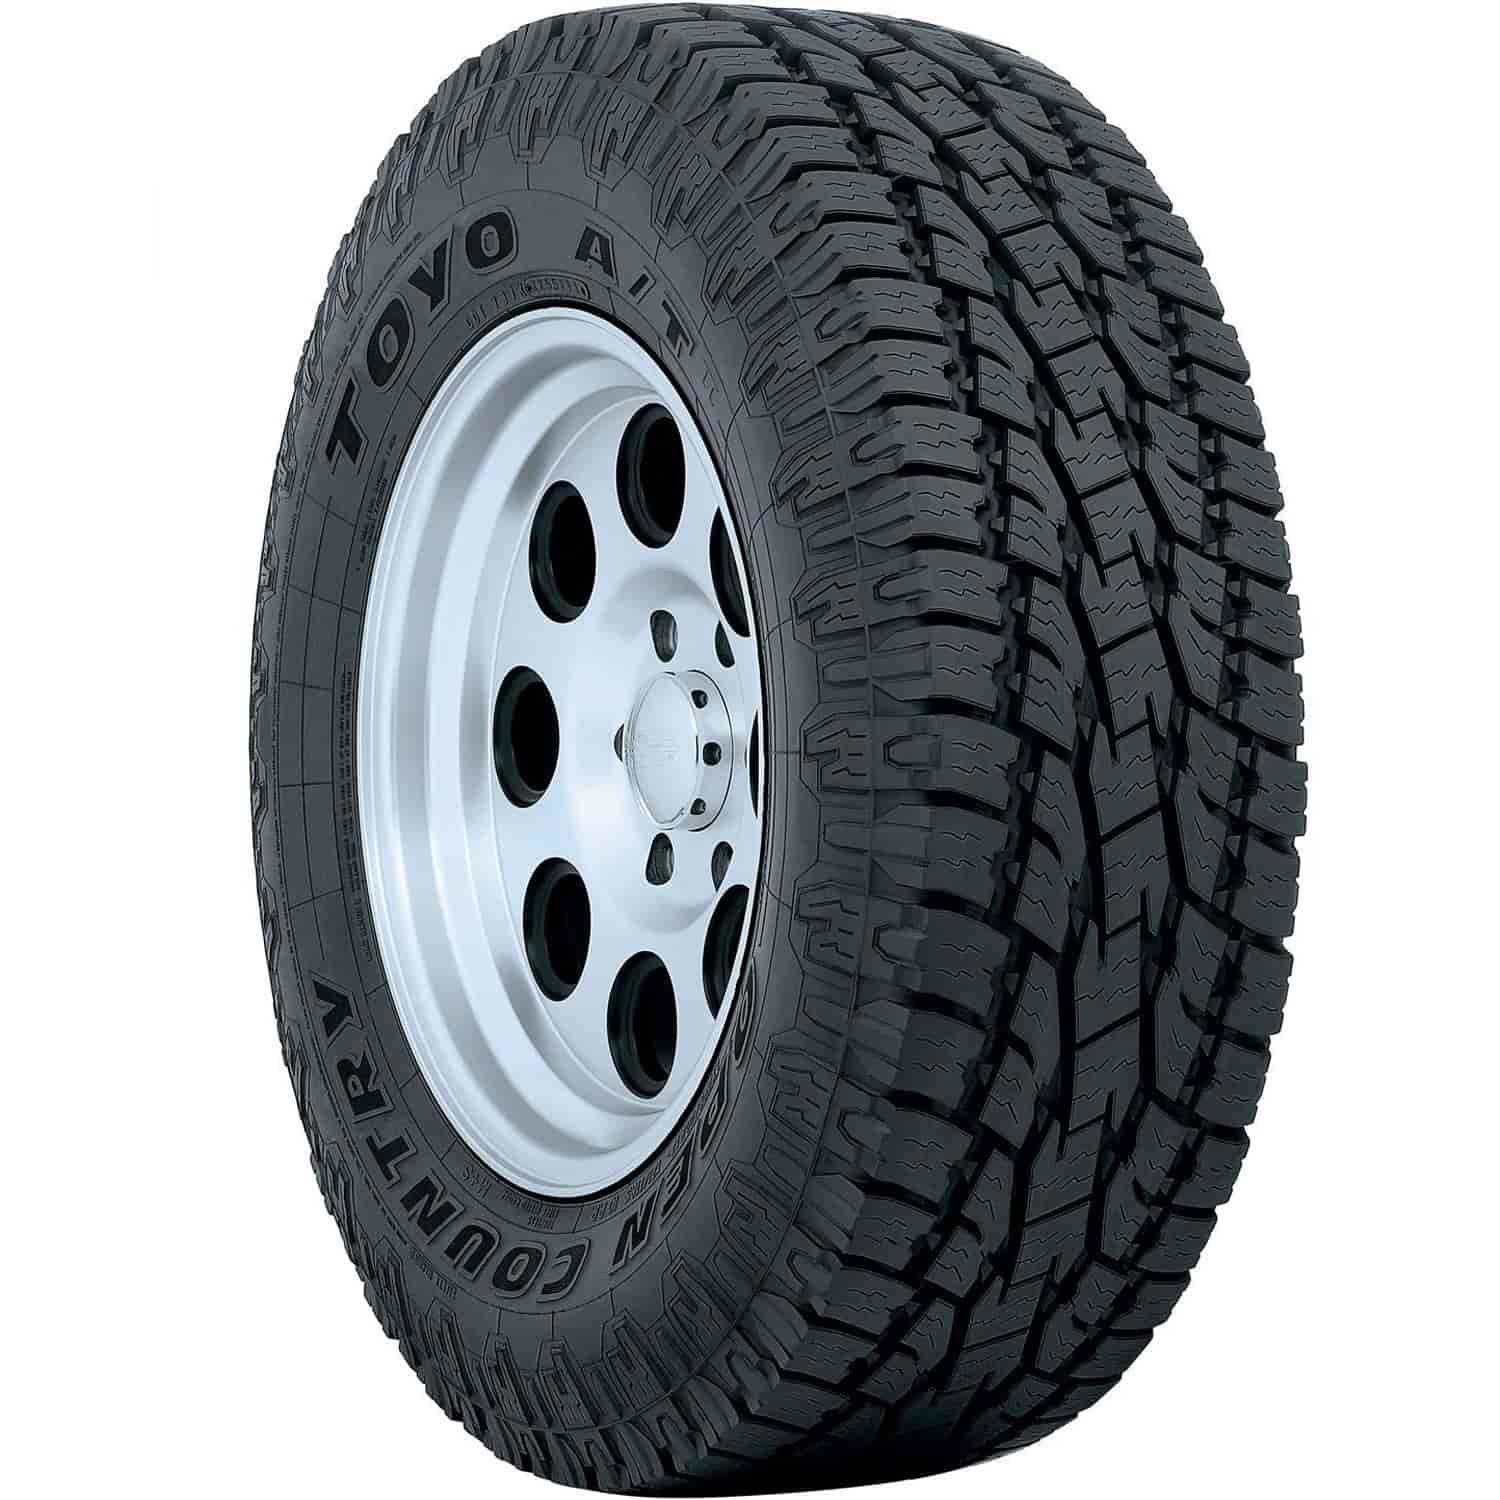 OPEN COUNTRY A/T II 35X1250R18 123R E/10